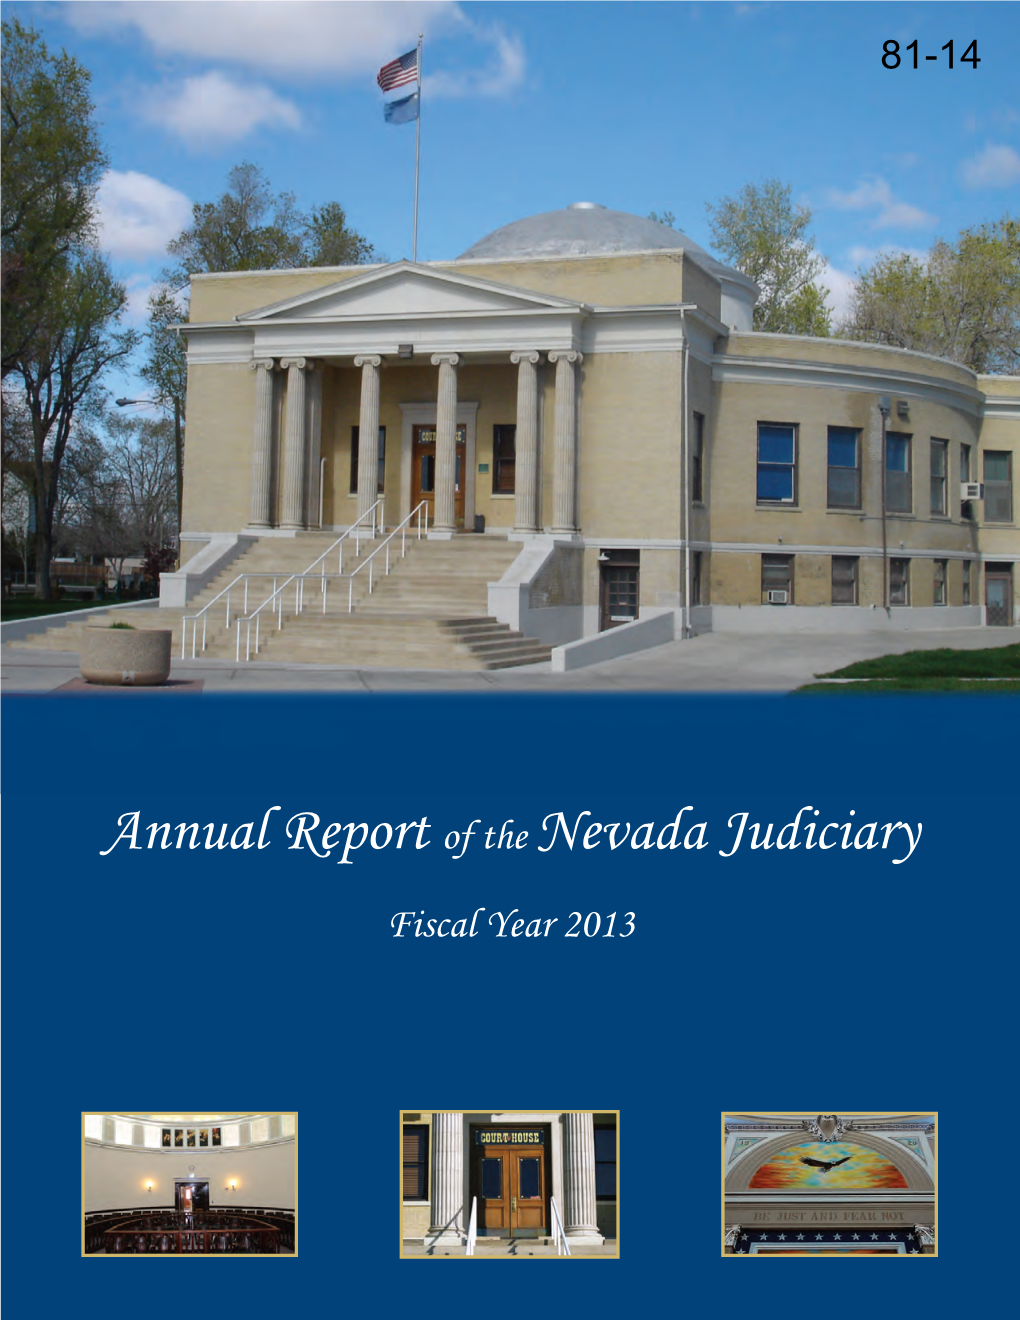 81-14: Annual Report of the Nevada Judiciary, Fiscal Year 2013